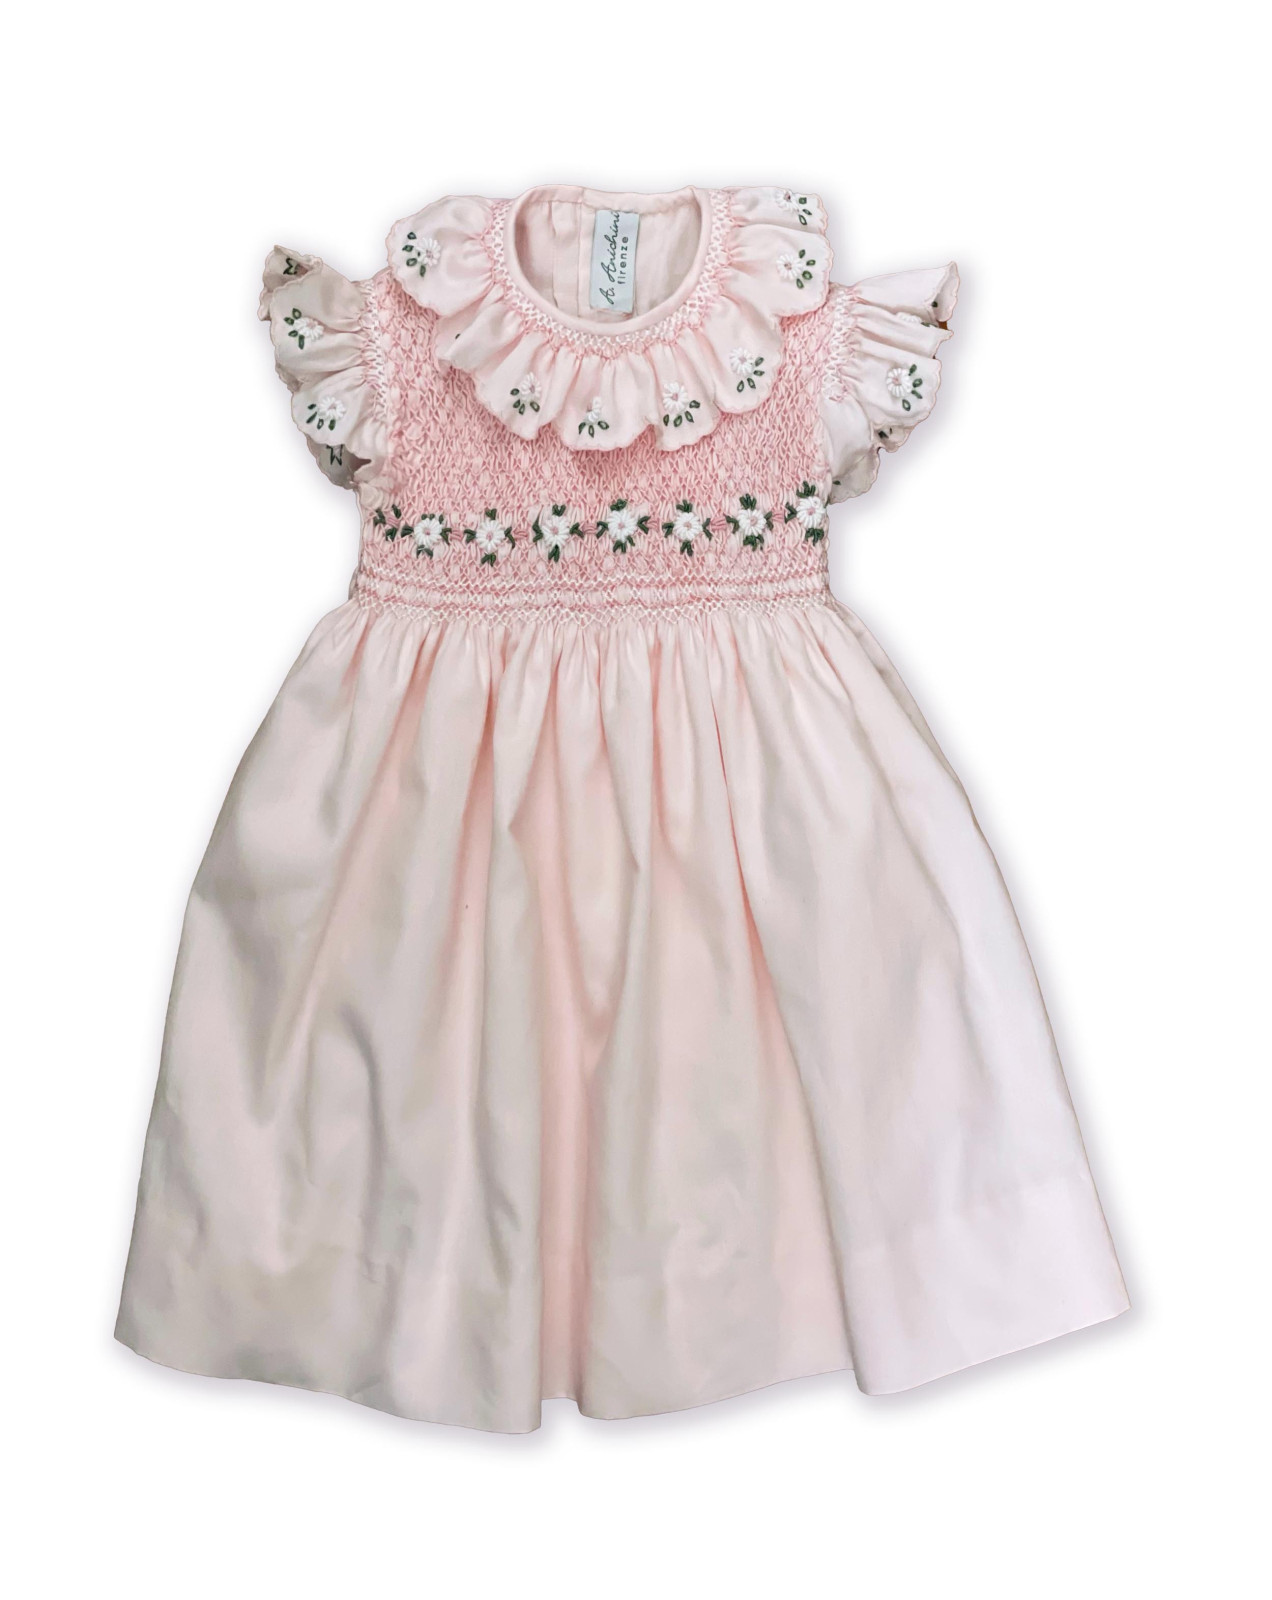 Chloris, girl cup sleeves dress, with daisies embroideries.